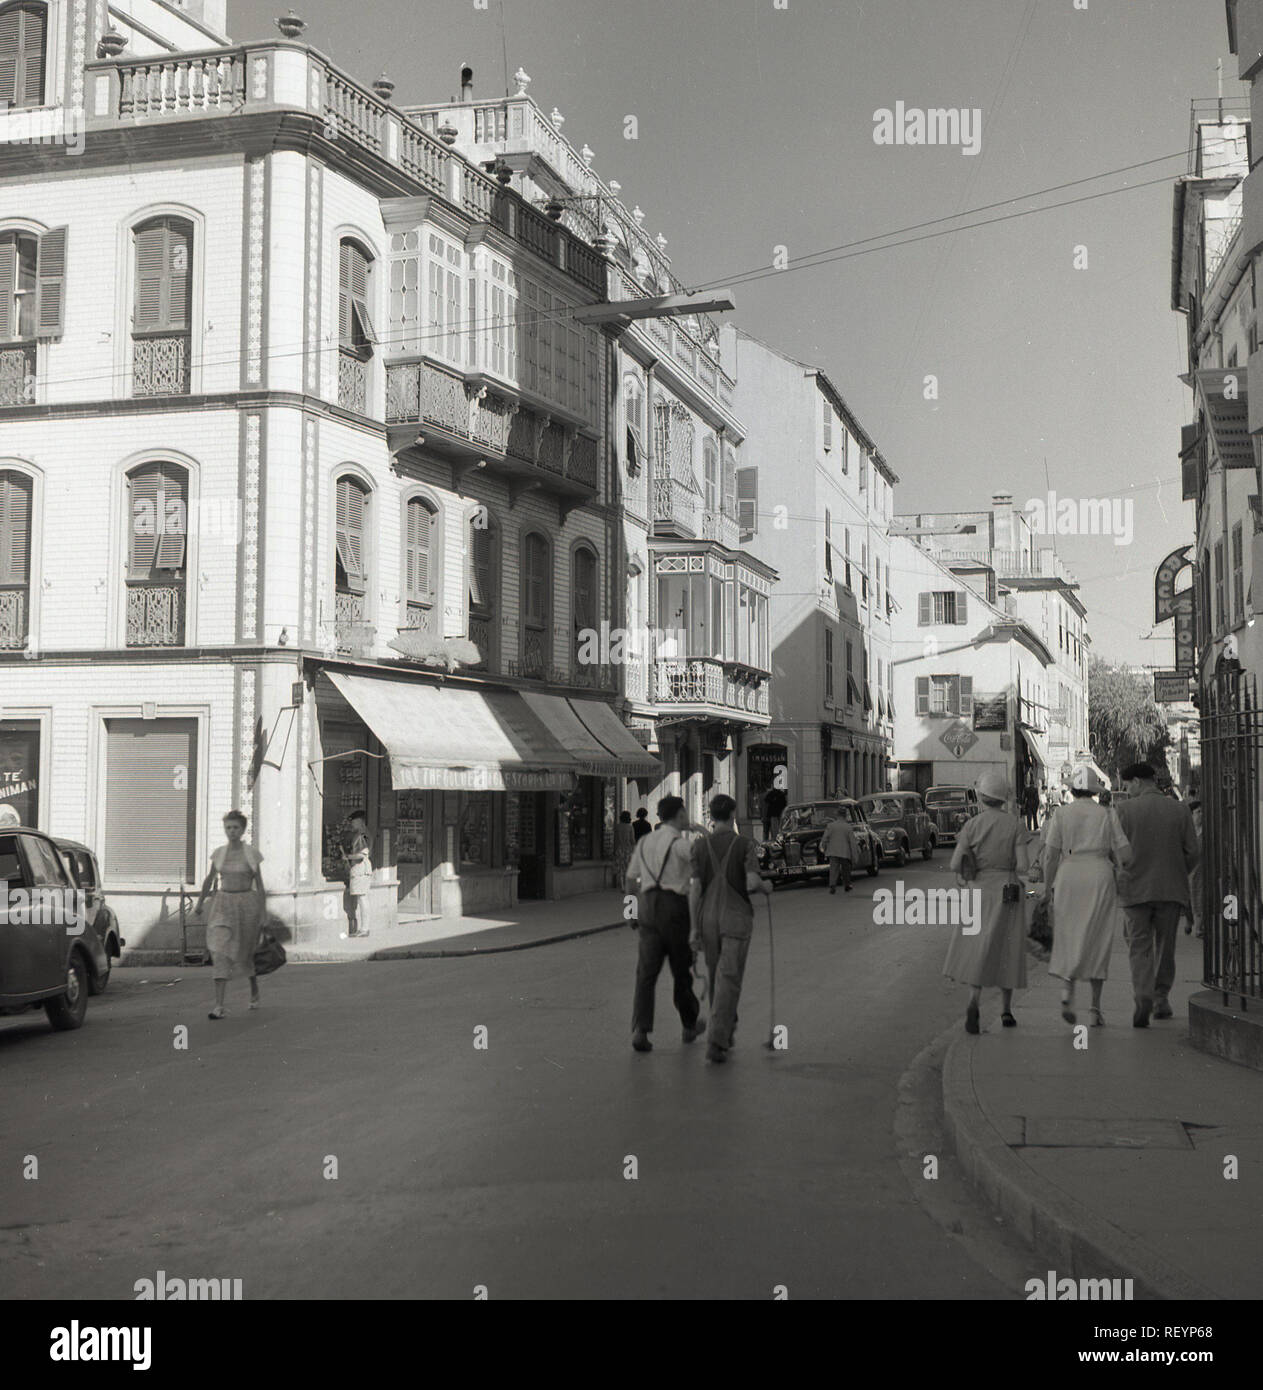 1950s, historical, people in a street in the old town, Gibraltar, a British Overseas Territory on Spain's south coast. As can be seen, the buidings are distinctively spanish in style, although the territory was ceded to the British in perpetuity in 1713. Stock Photo